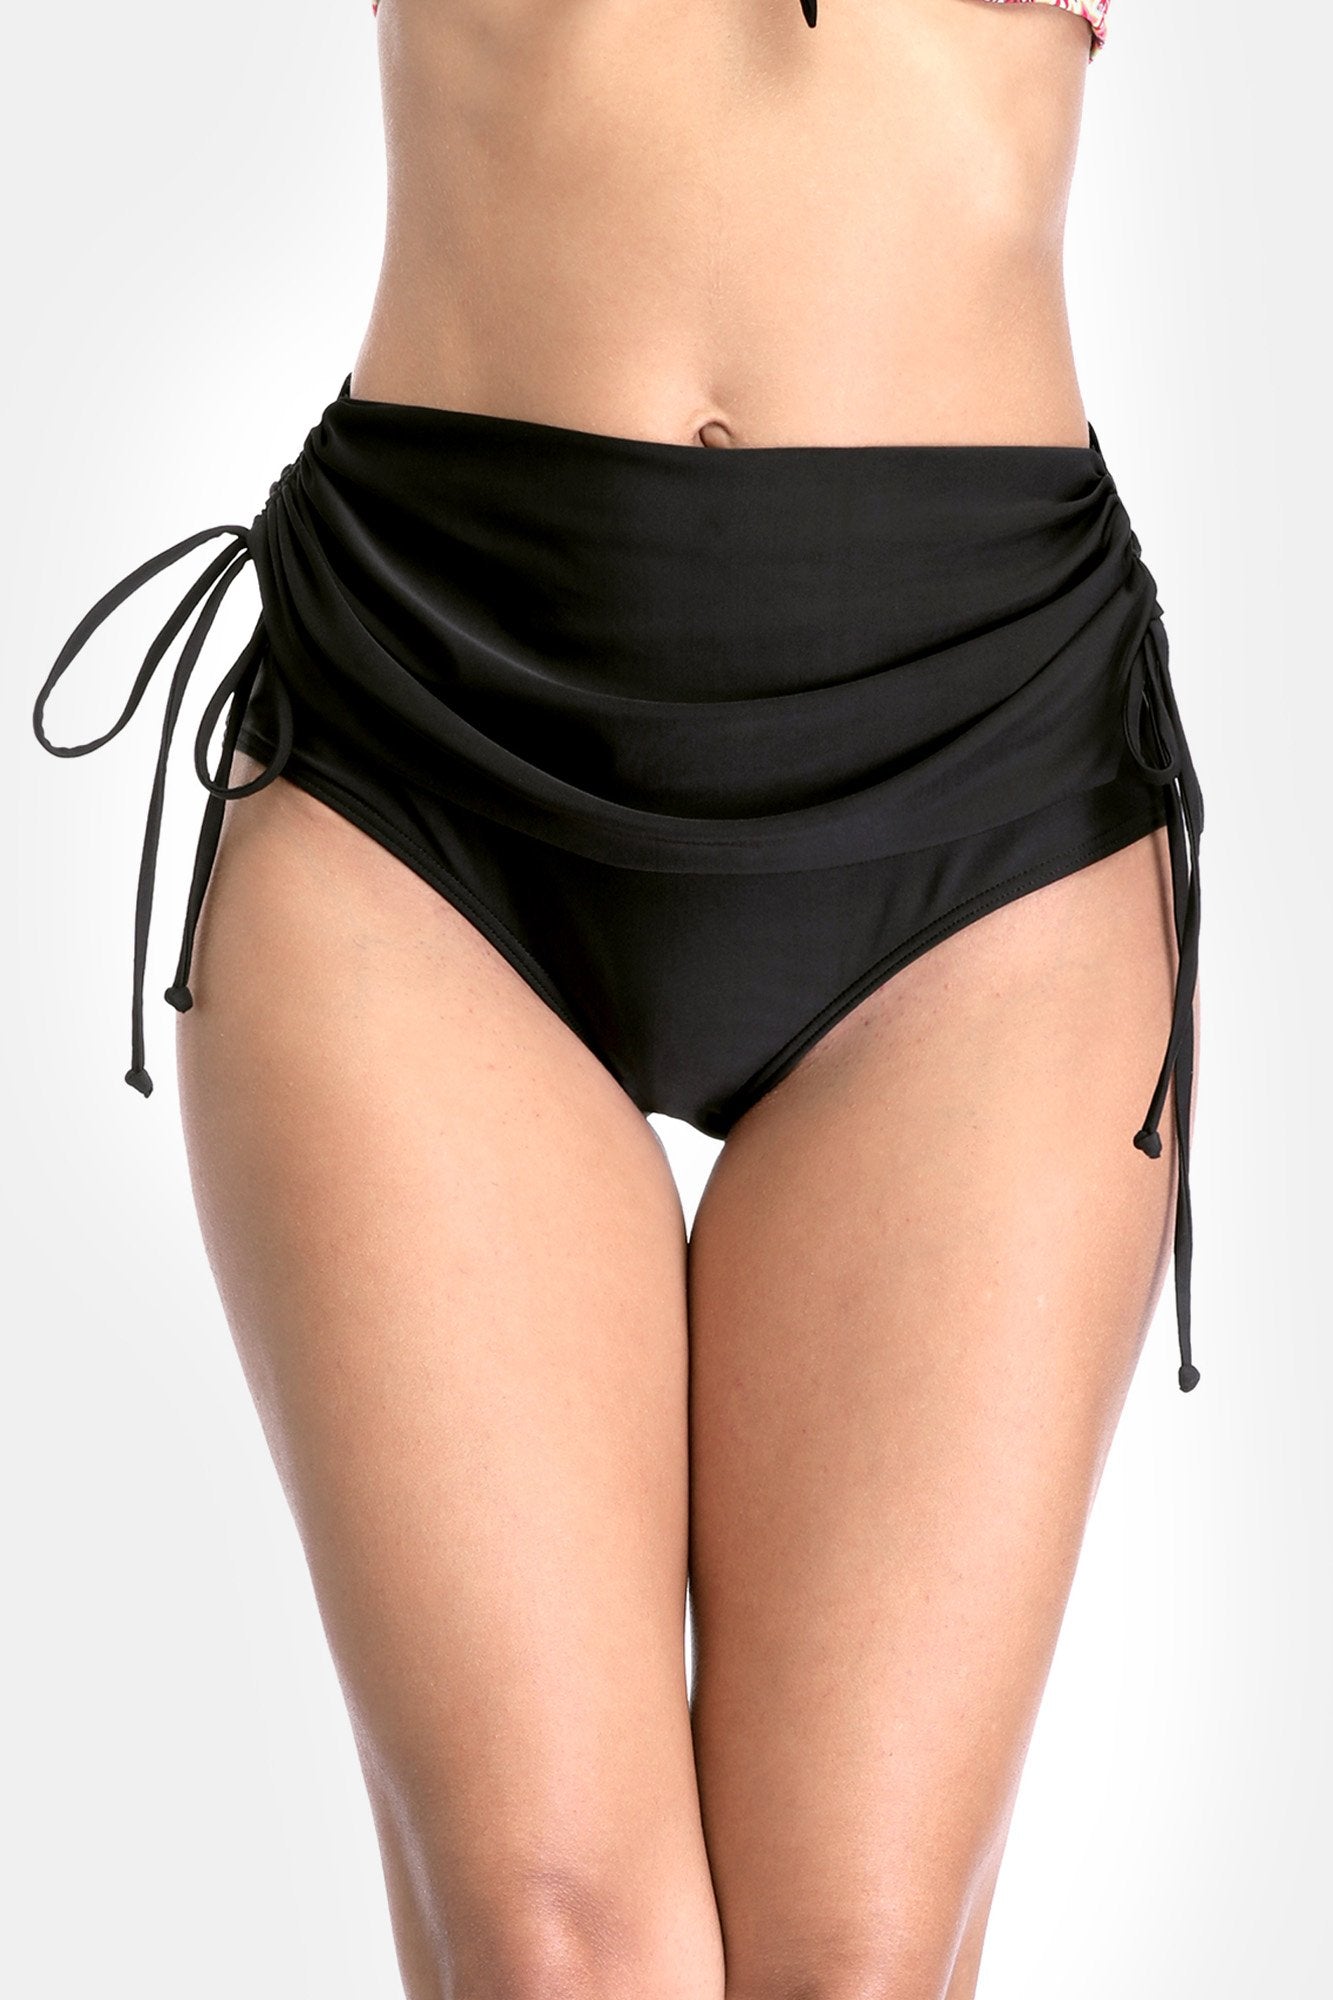 Attraco Women's Swimsuit Plus Size High Waist Shorts-Attraco | Fashion Outdoor Clothing